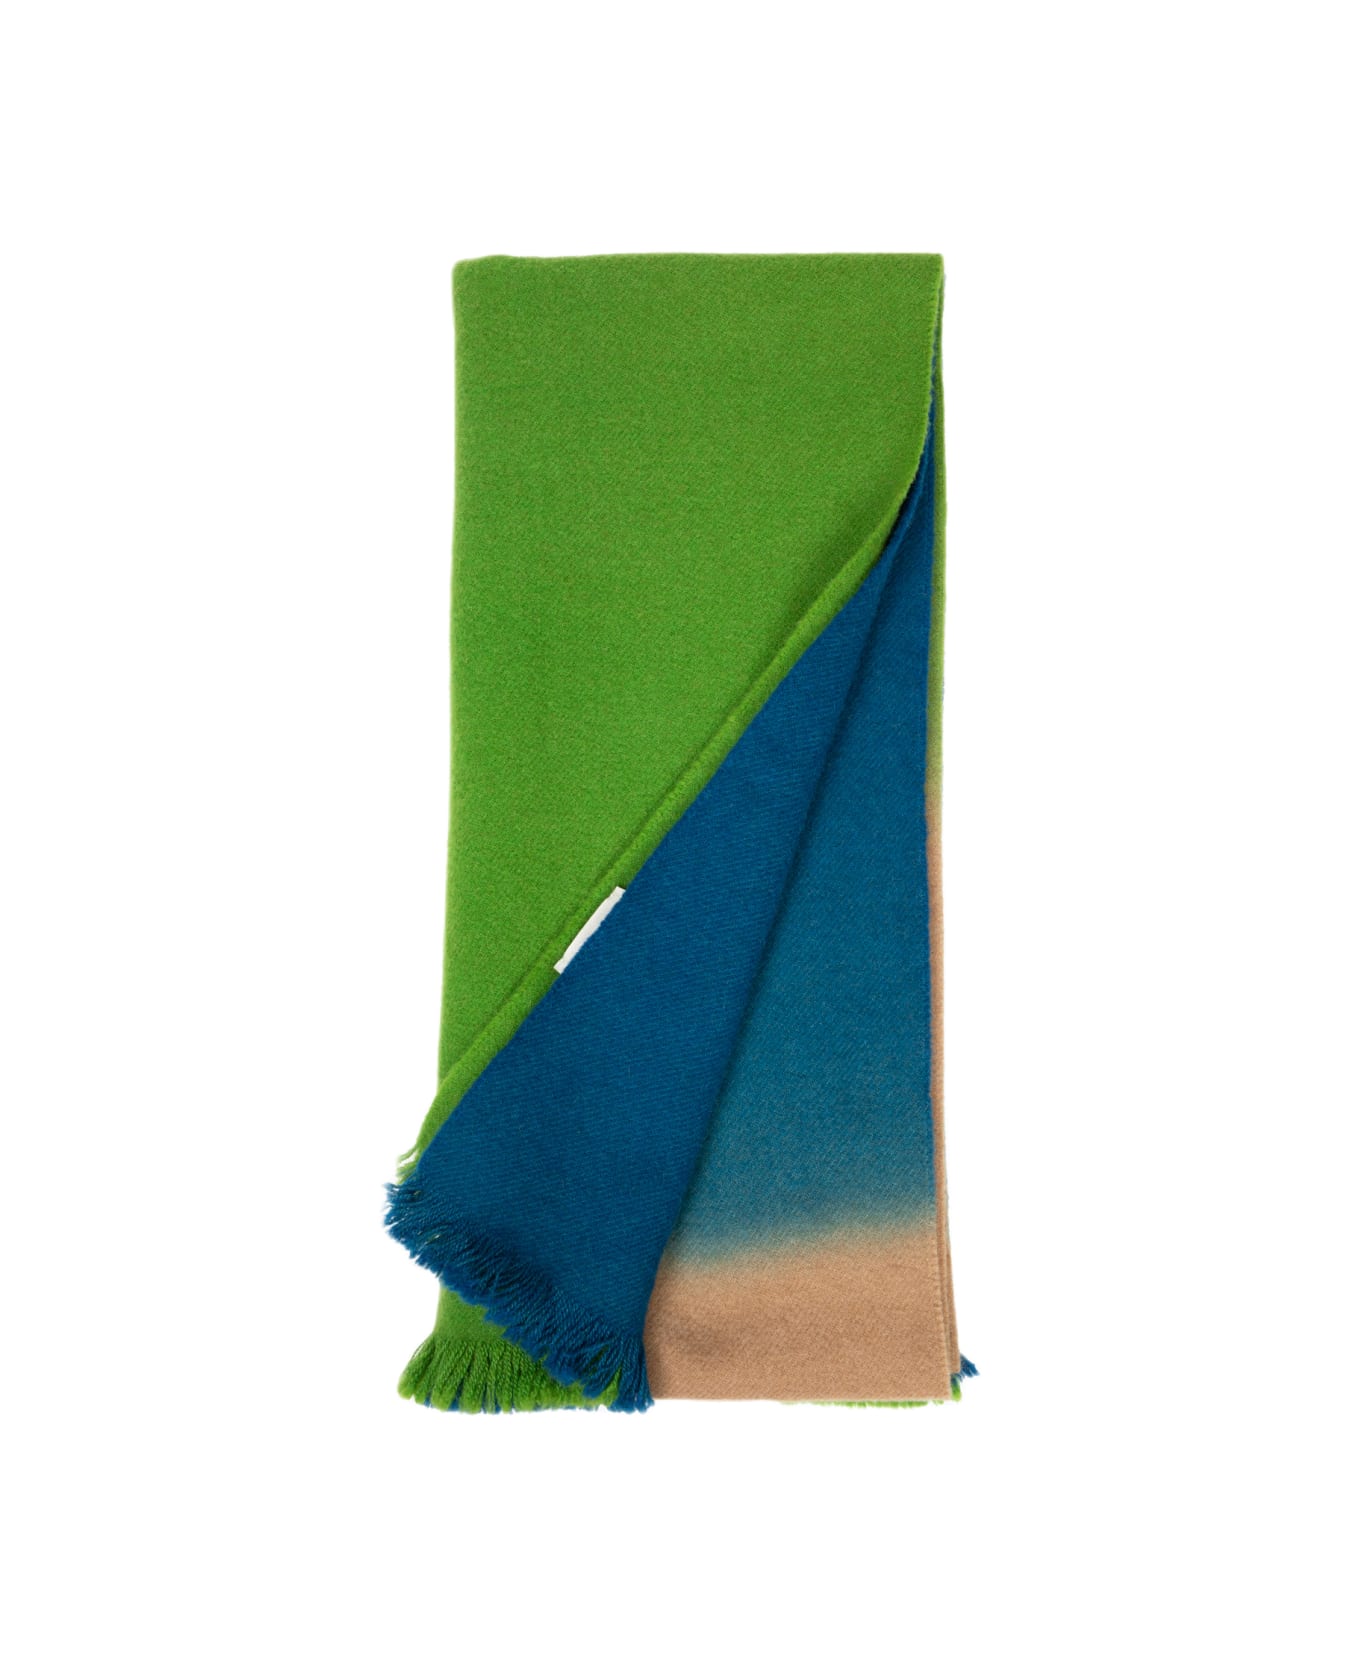 Piacenza Cashmere Sciarpa Green and teal baby camel scarf - Verde/blu